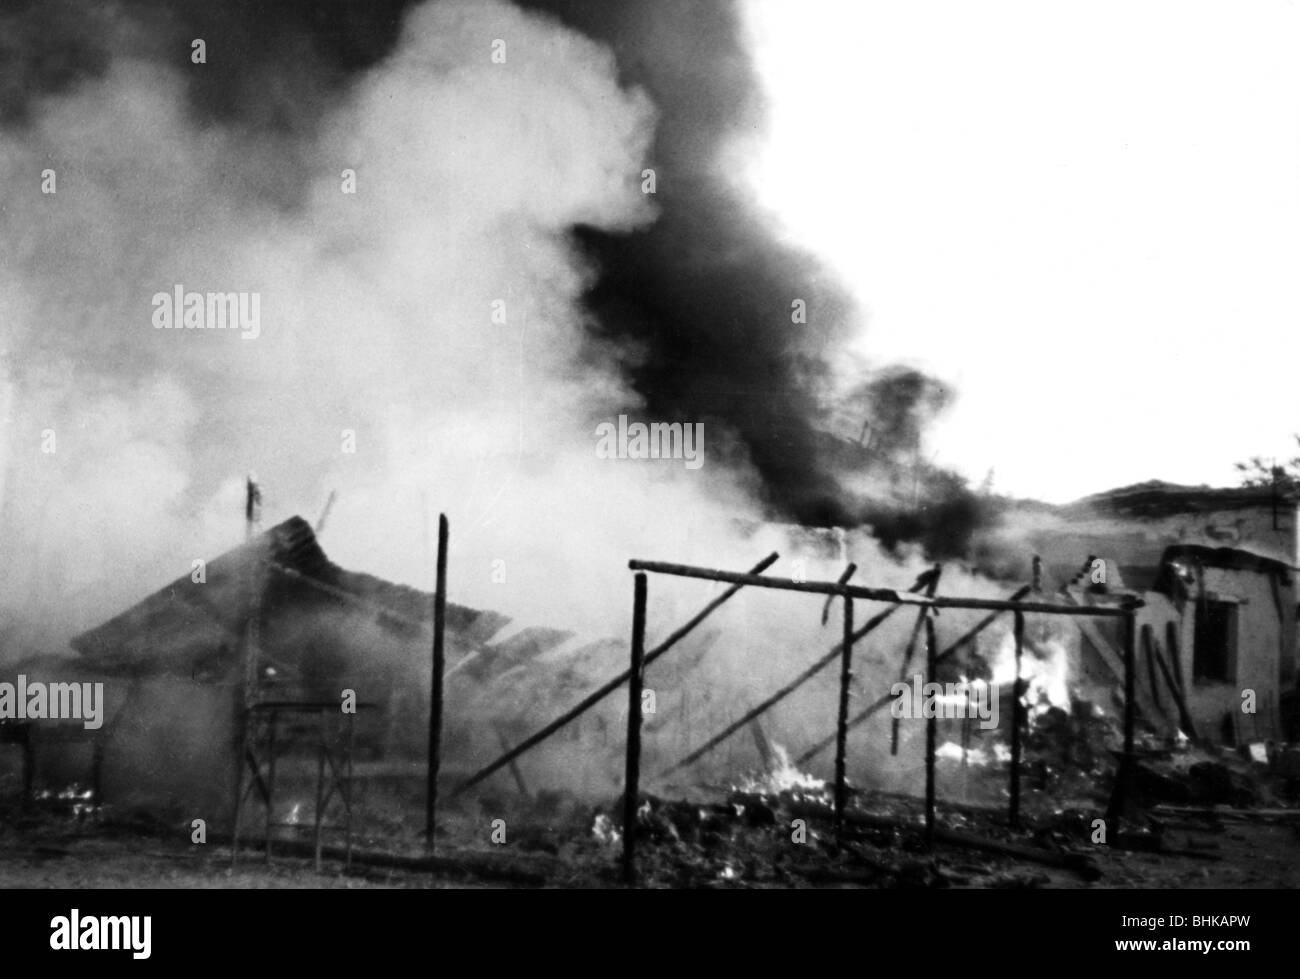 events, Second World War / WWII, Russia 1942 / 1943, burning house, circa 1942, fire, destruction, 20th century, historic, historical, Eastern Front, USSR, Soviet Union, flames, 1940s, Stock Photo